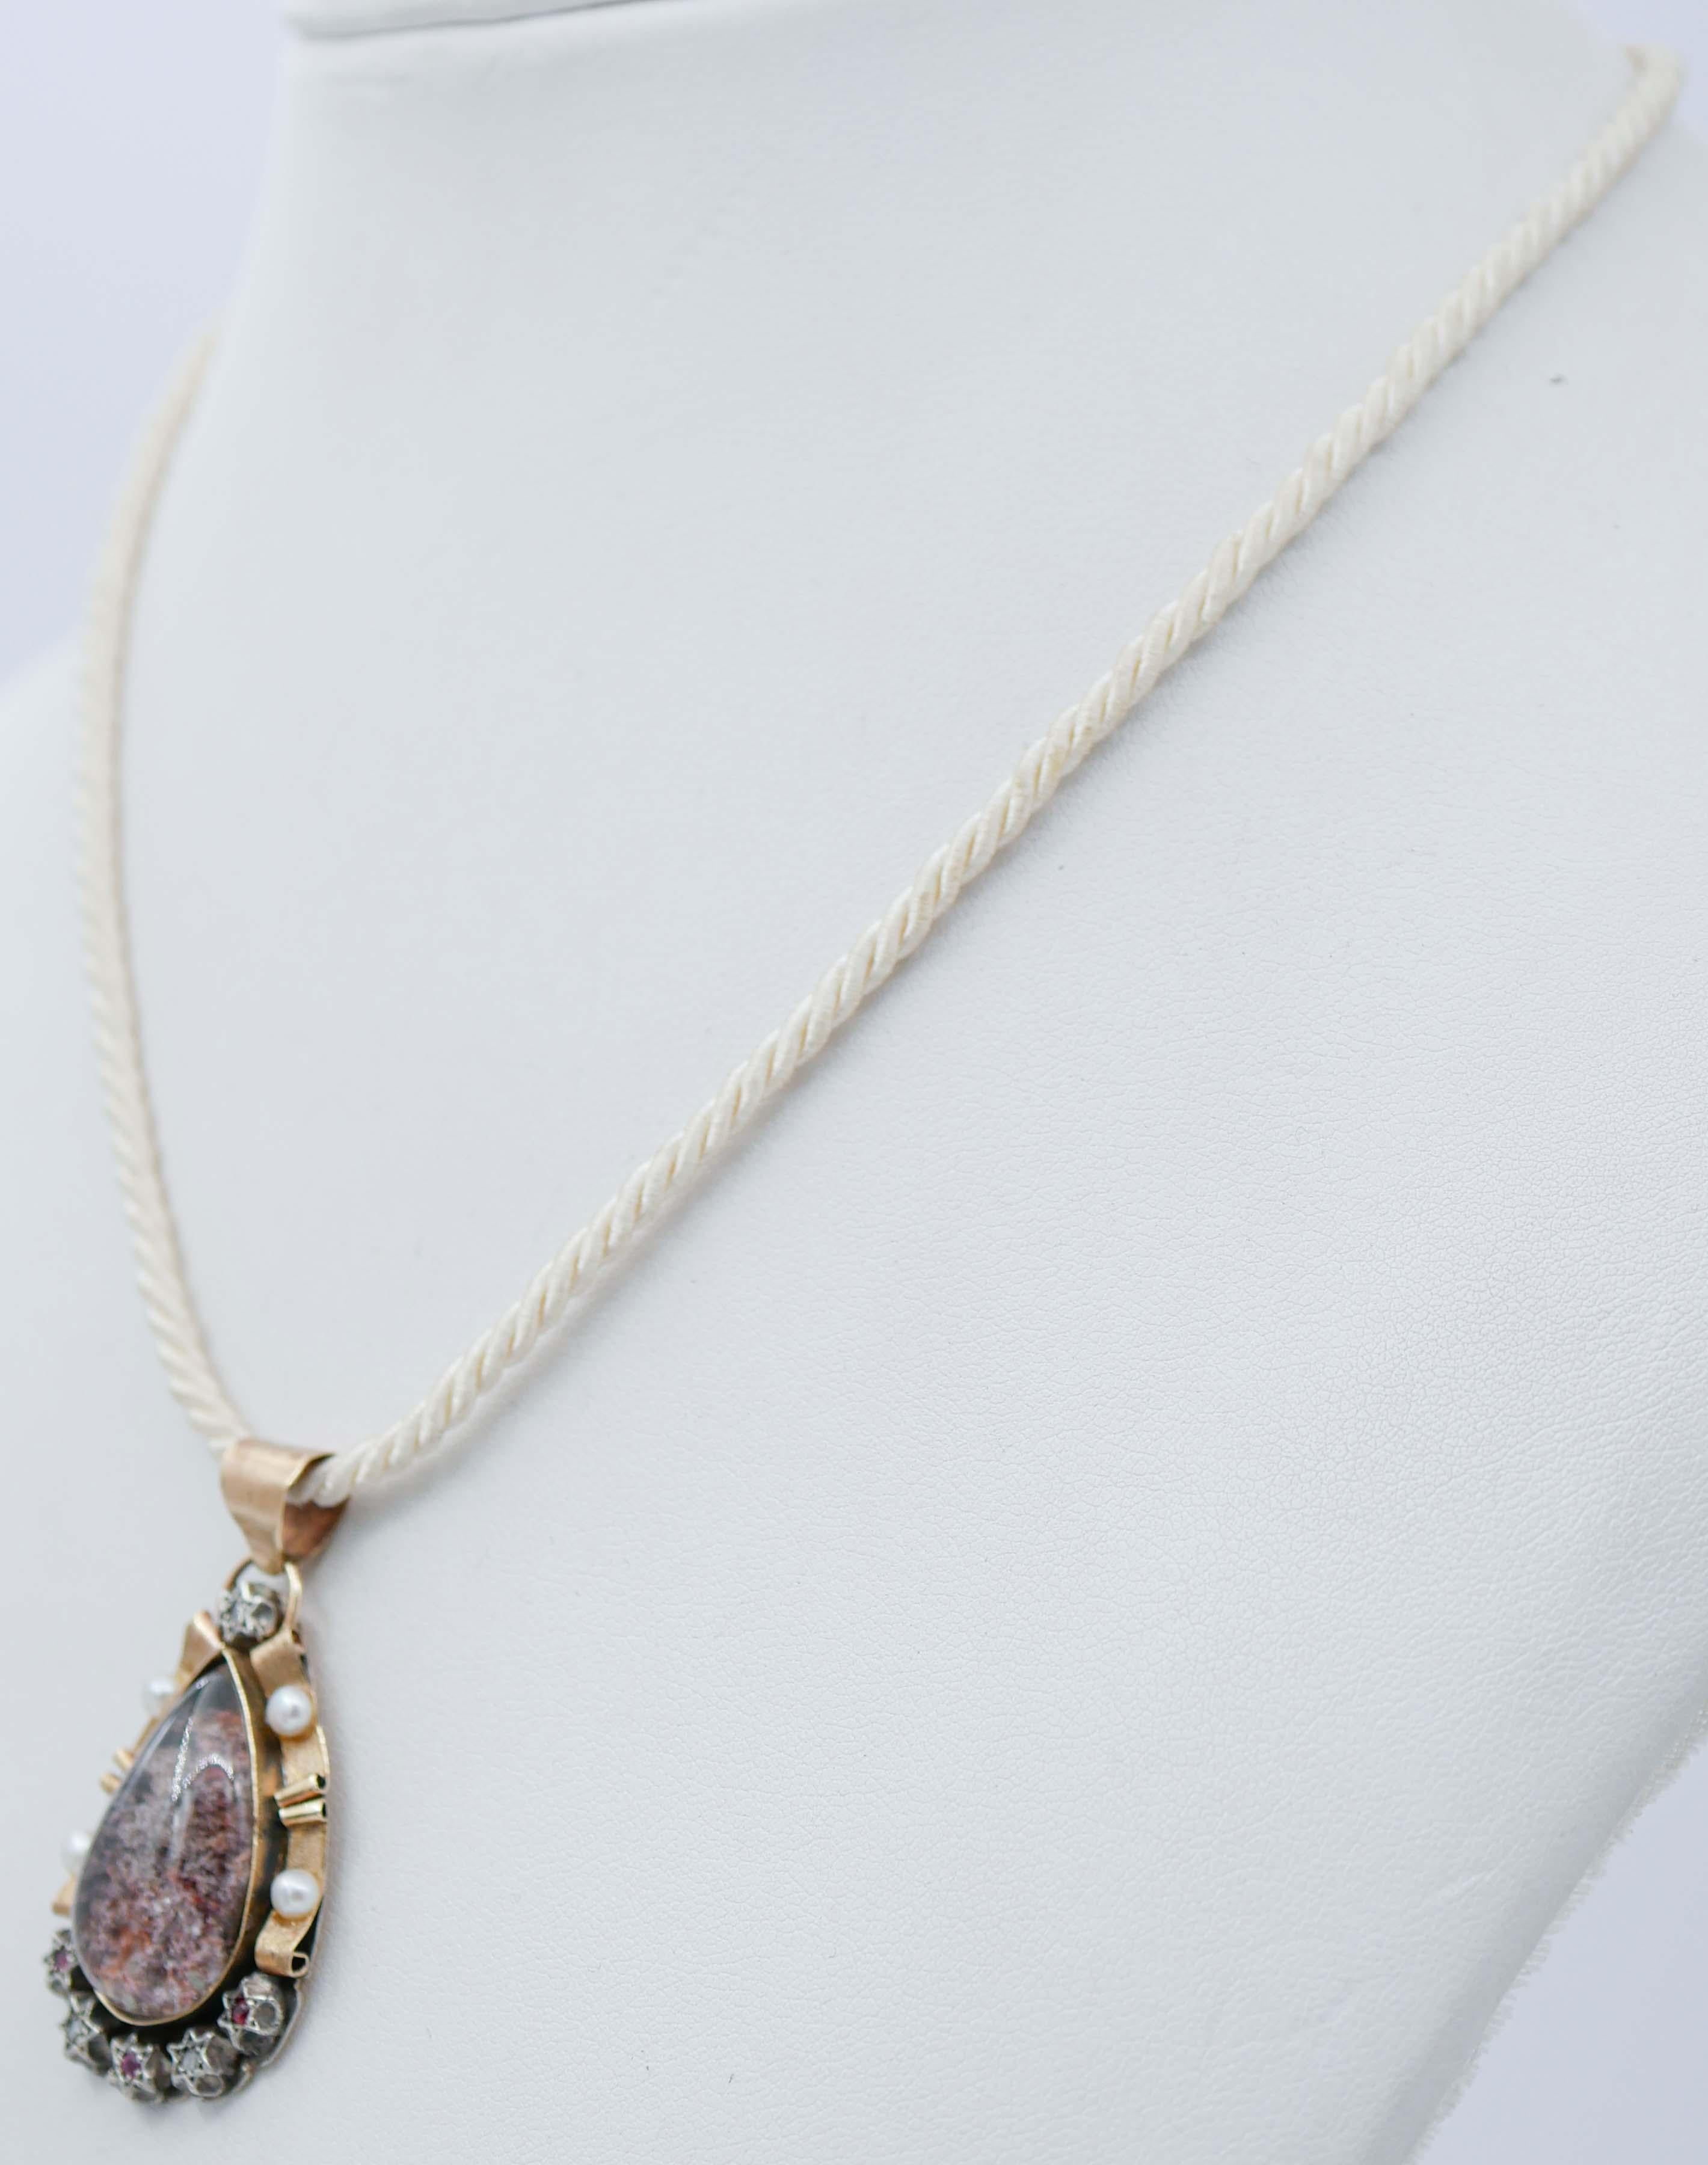 Retro Diamonds, Rubies, Musk Quartz, Pearls, Rose Gold and Silver Pendant Necklace. For Sale